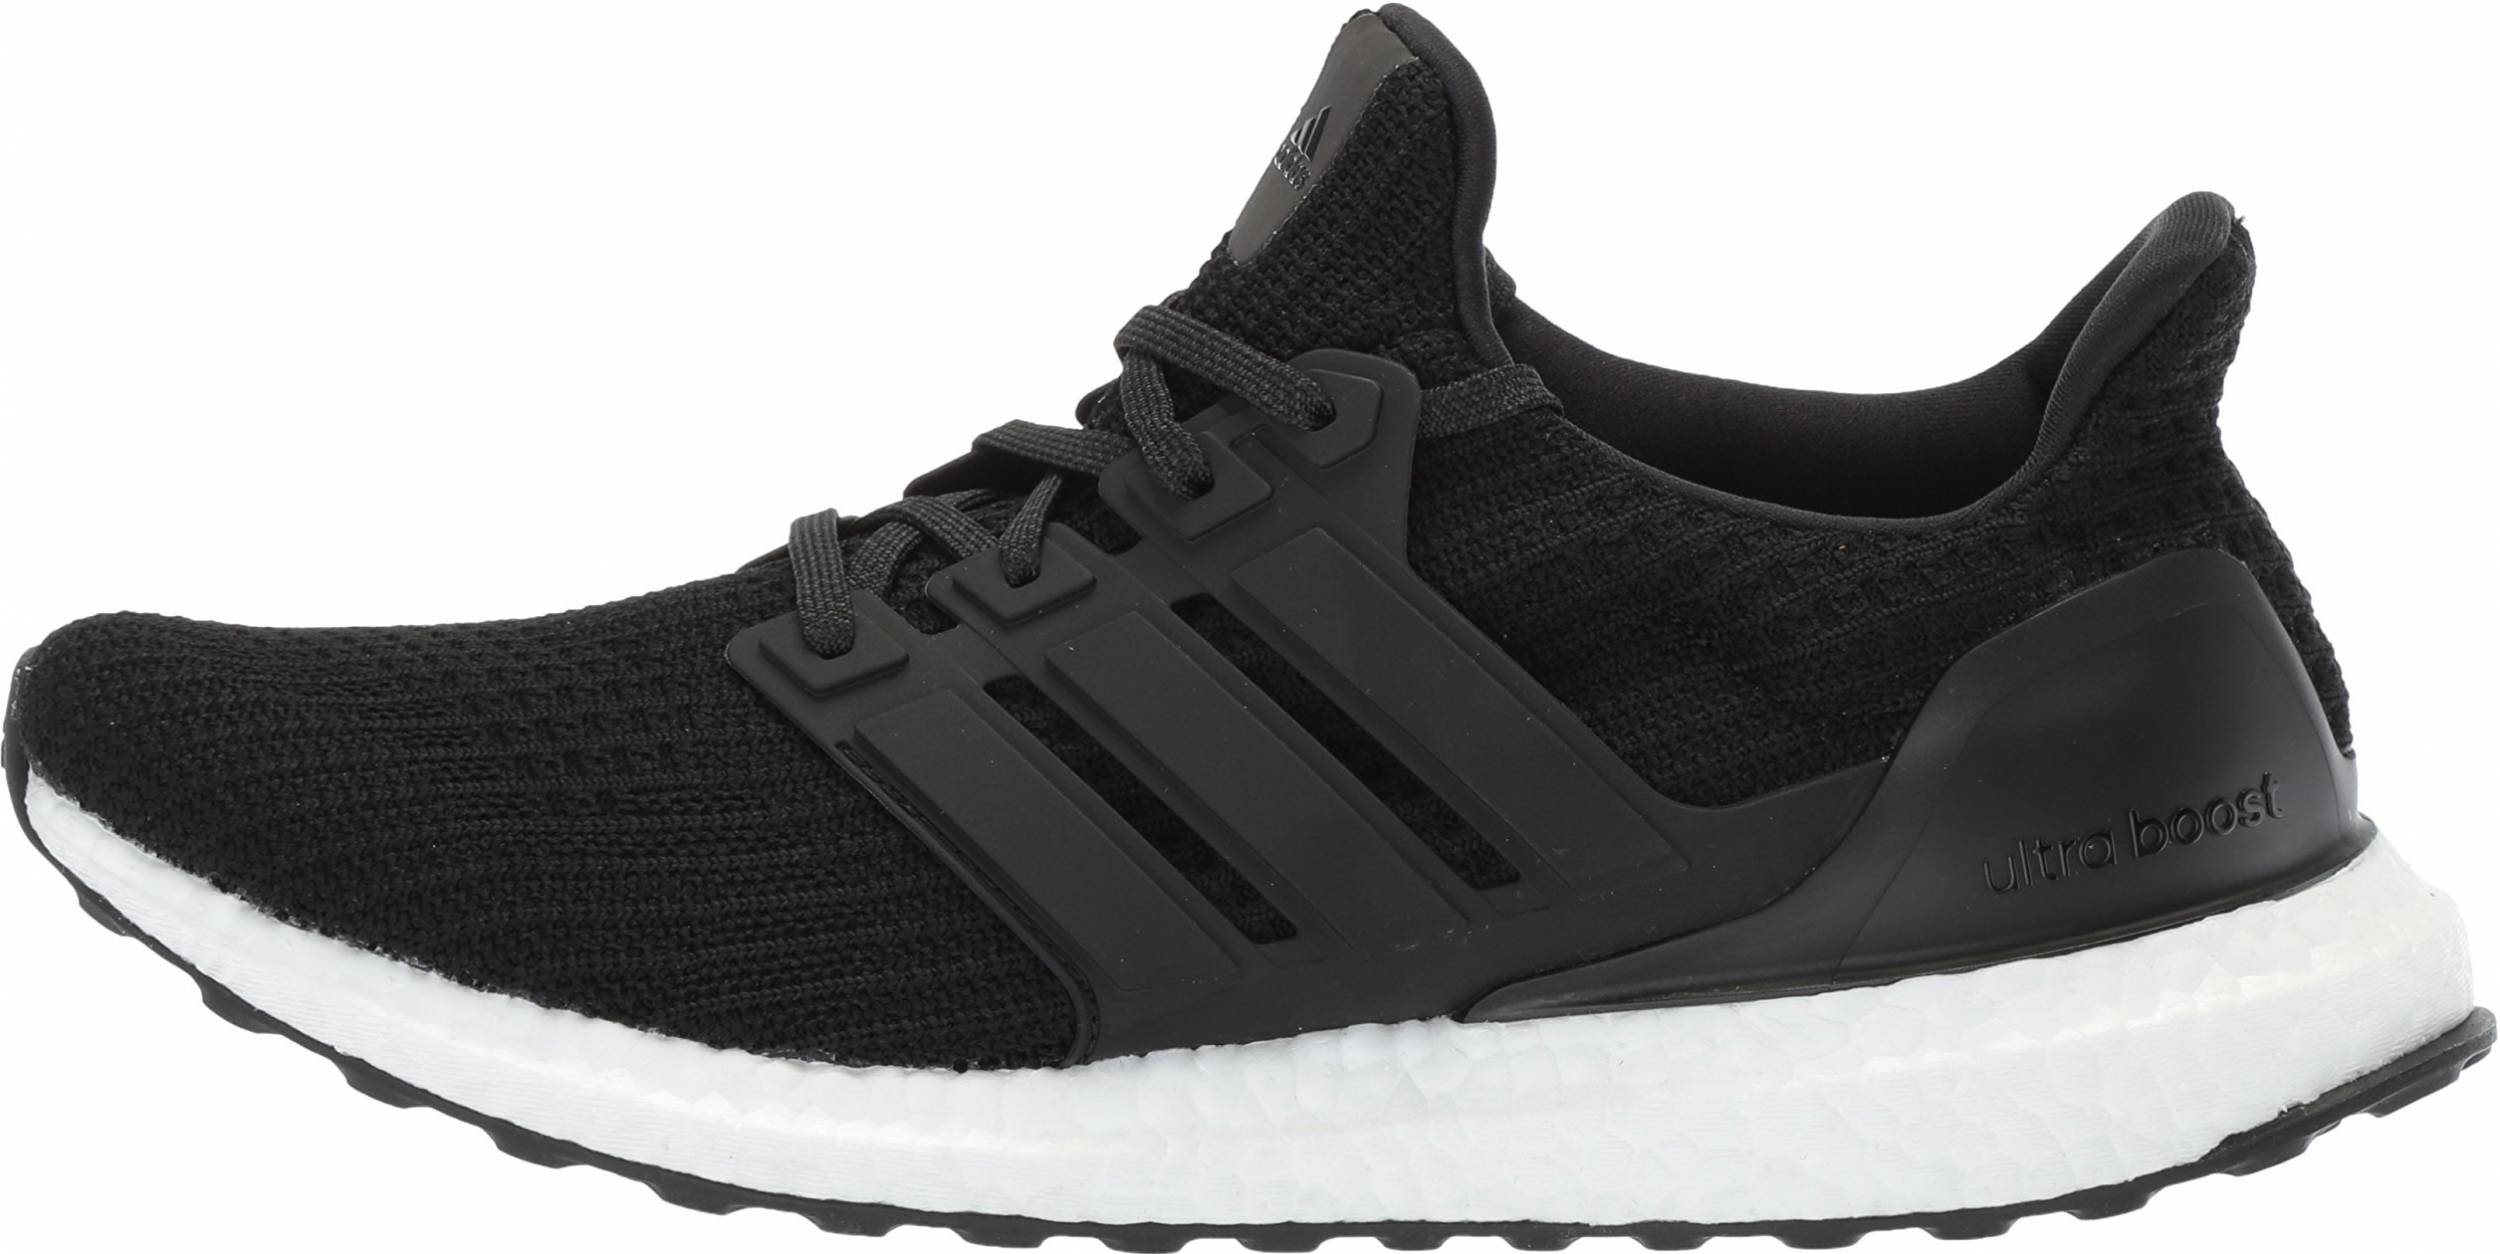 Only $76 + Review of Adidas Ultraboost 